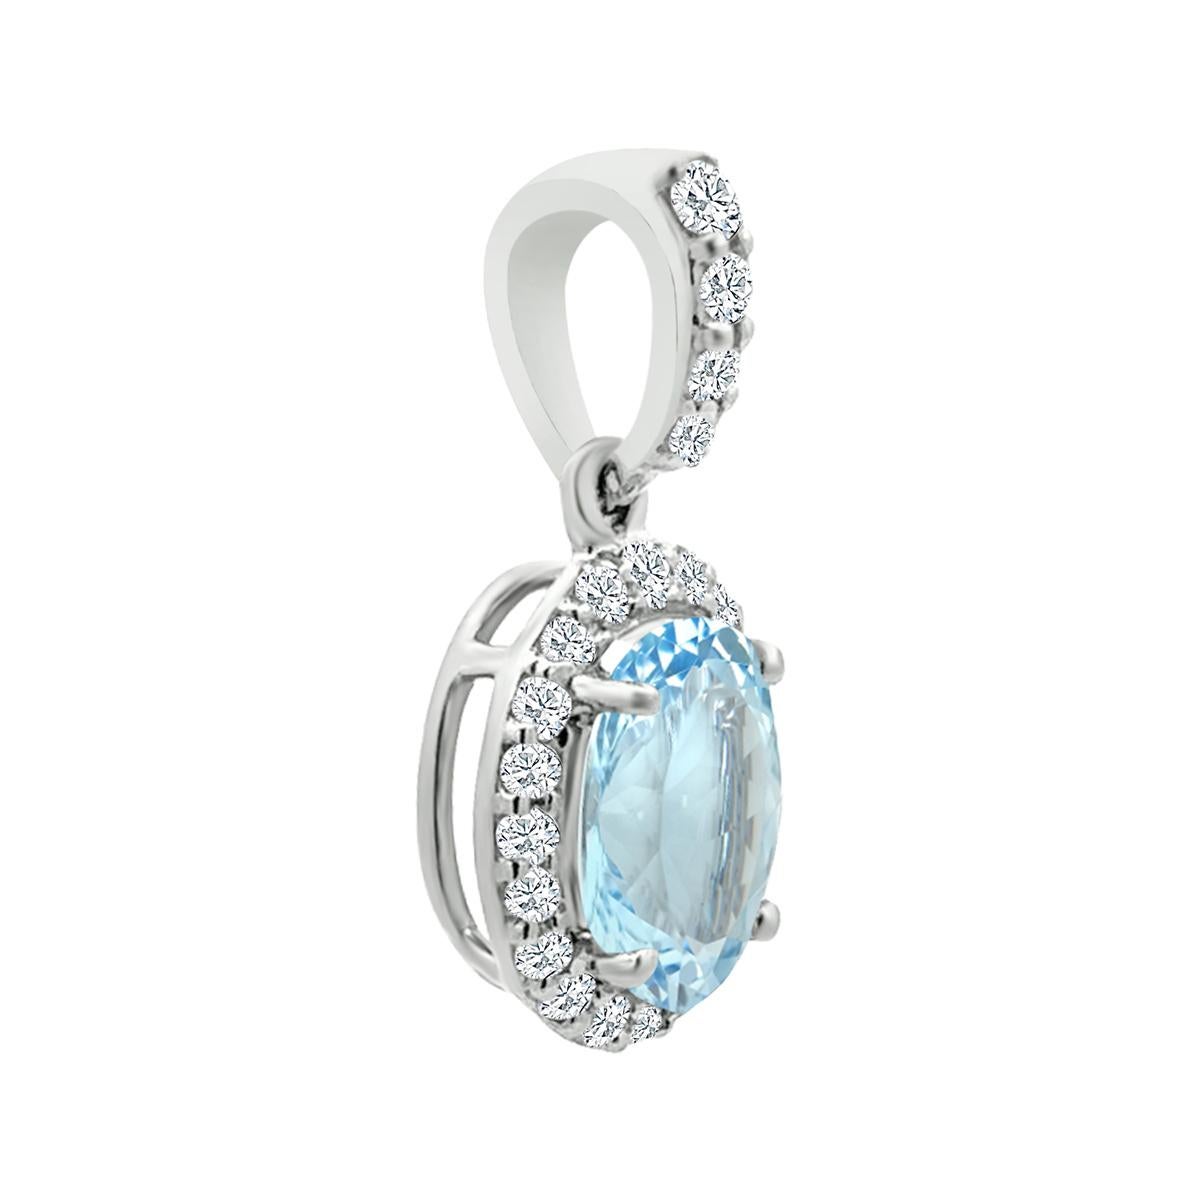 Treat Yourself To Something Special With This Stunning Pendant.
This a Very Fine Quality March Birthstone Pendant, We Really Adore The Design Of This Pendant.
This 14K White Gold Pendant Features 7x5mm Blue Aquamarine Gemstone And Round Brilliant